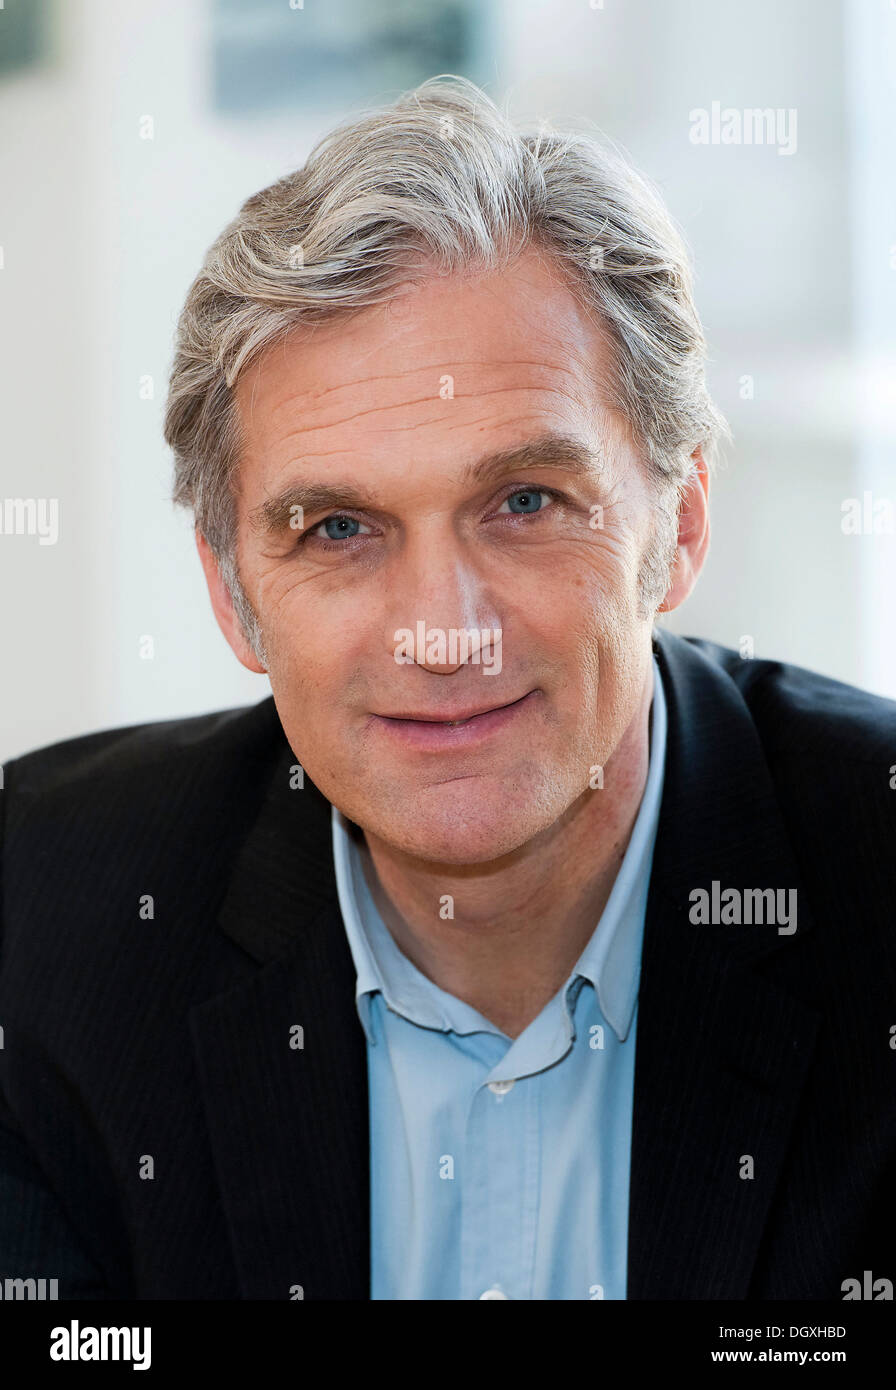 Actor Walter Sittler at a photocall in Munich, Bavaria Stock Photo